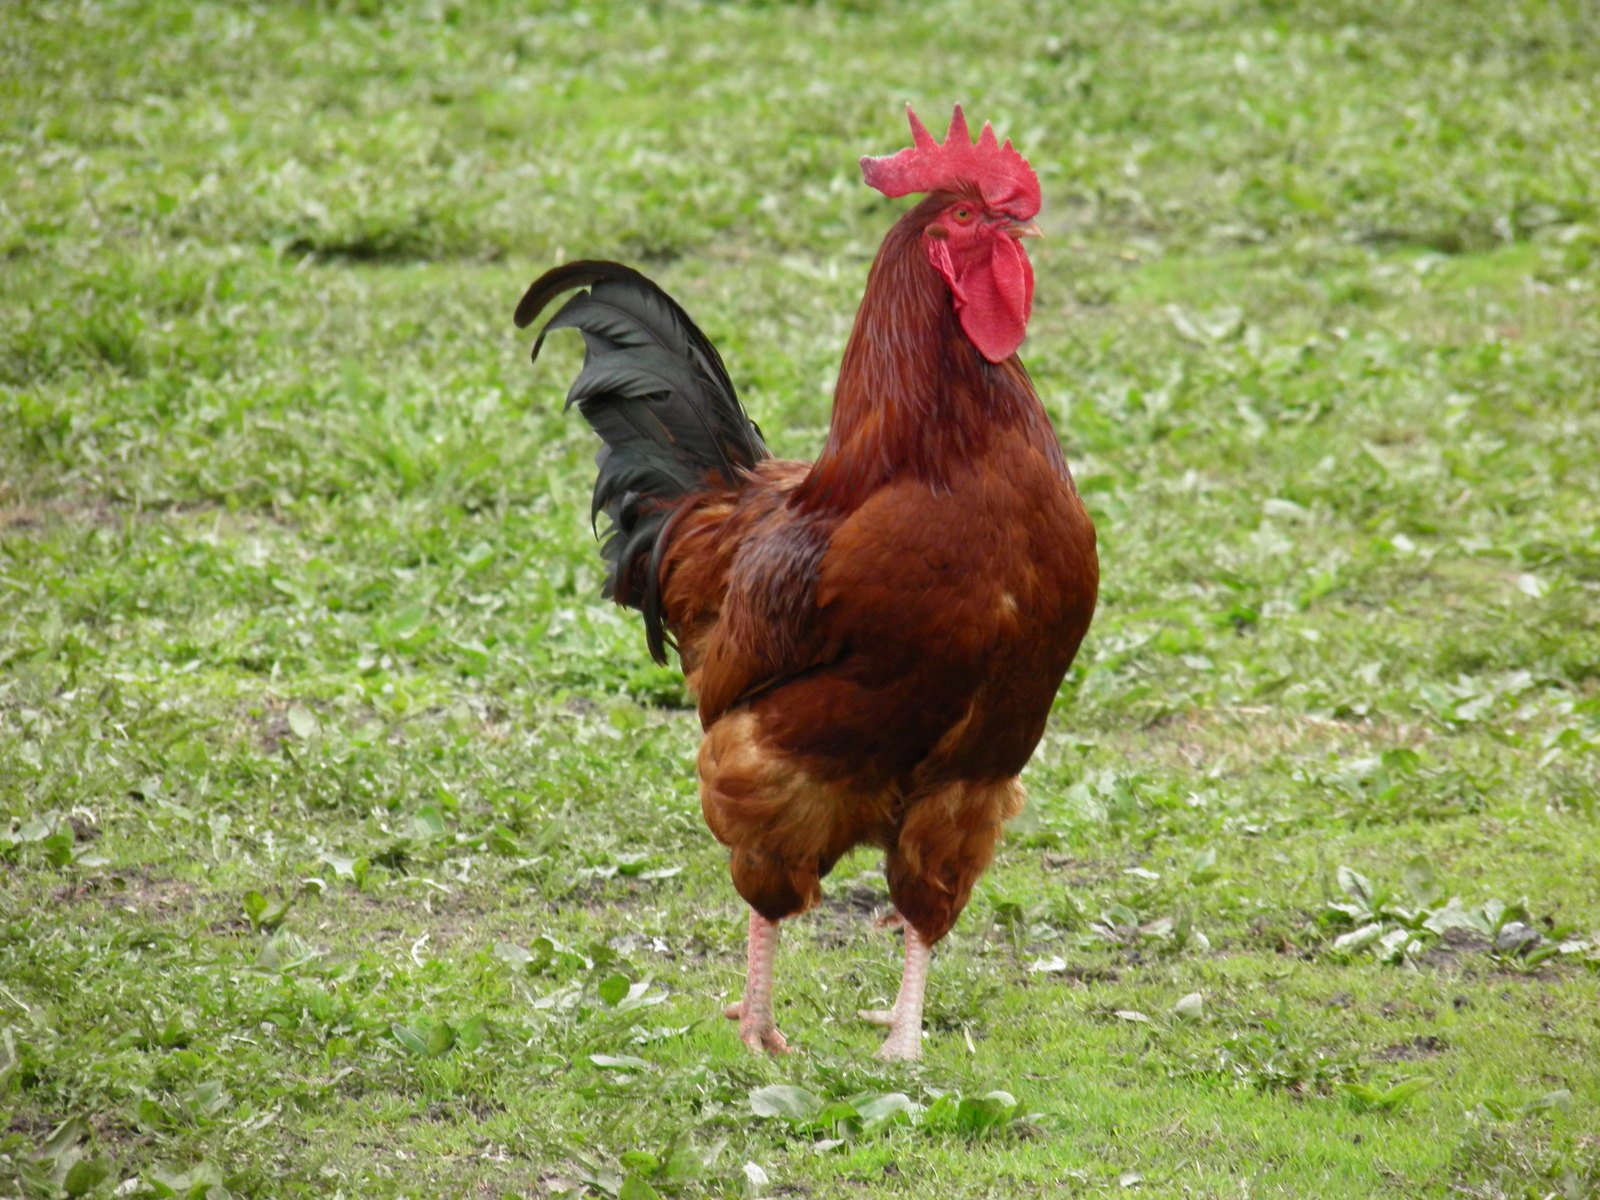 a brown and black rooster walking across a green field